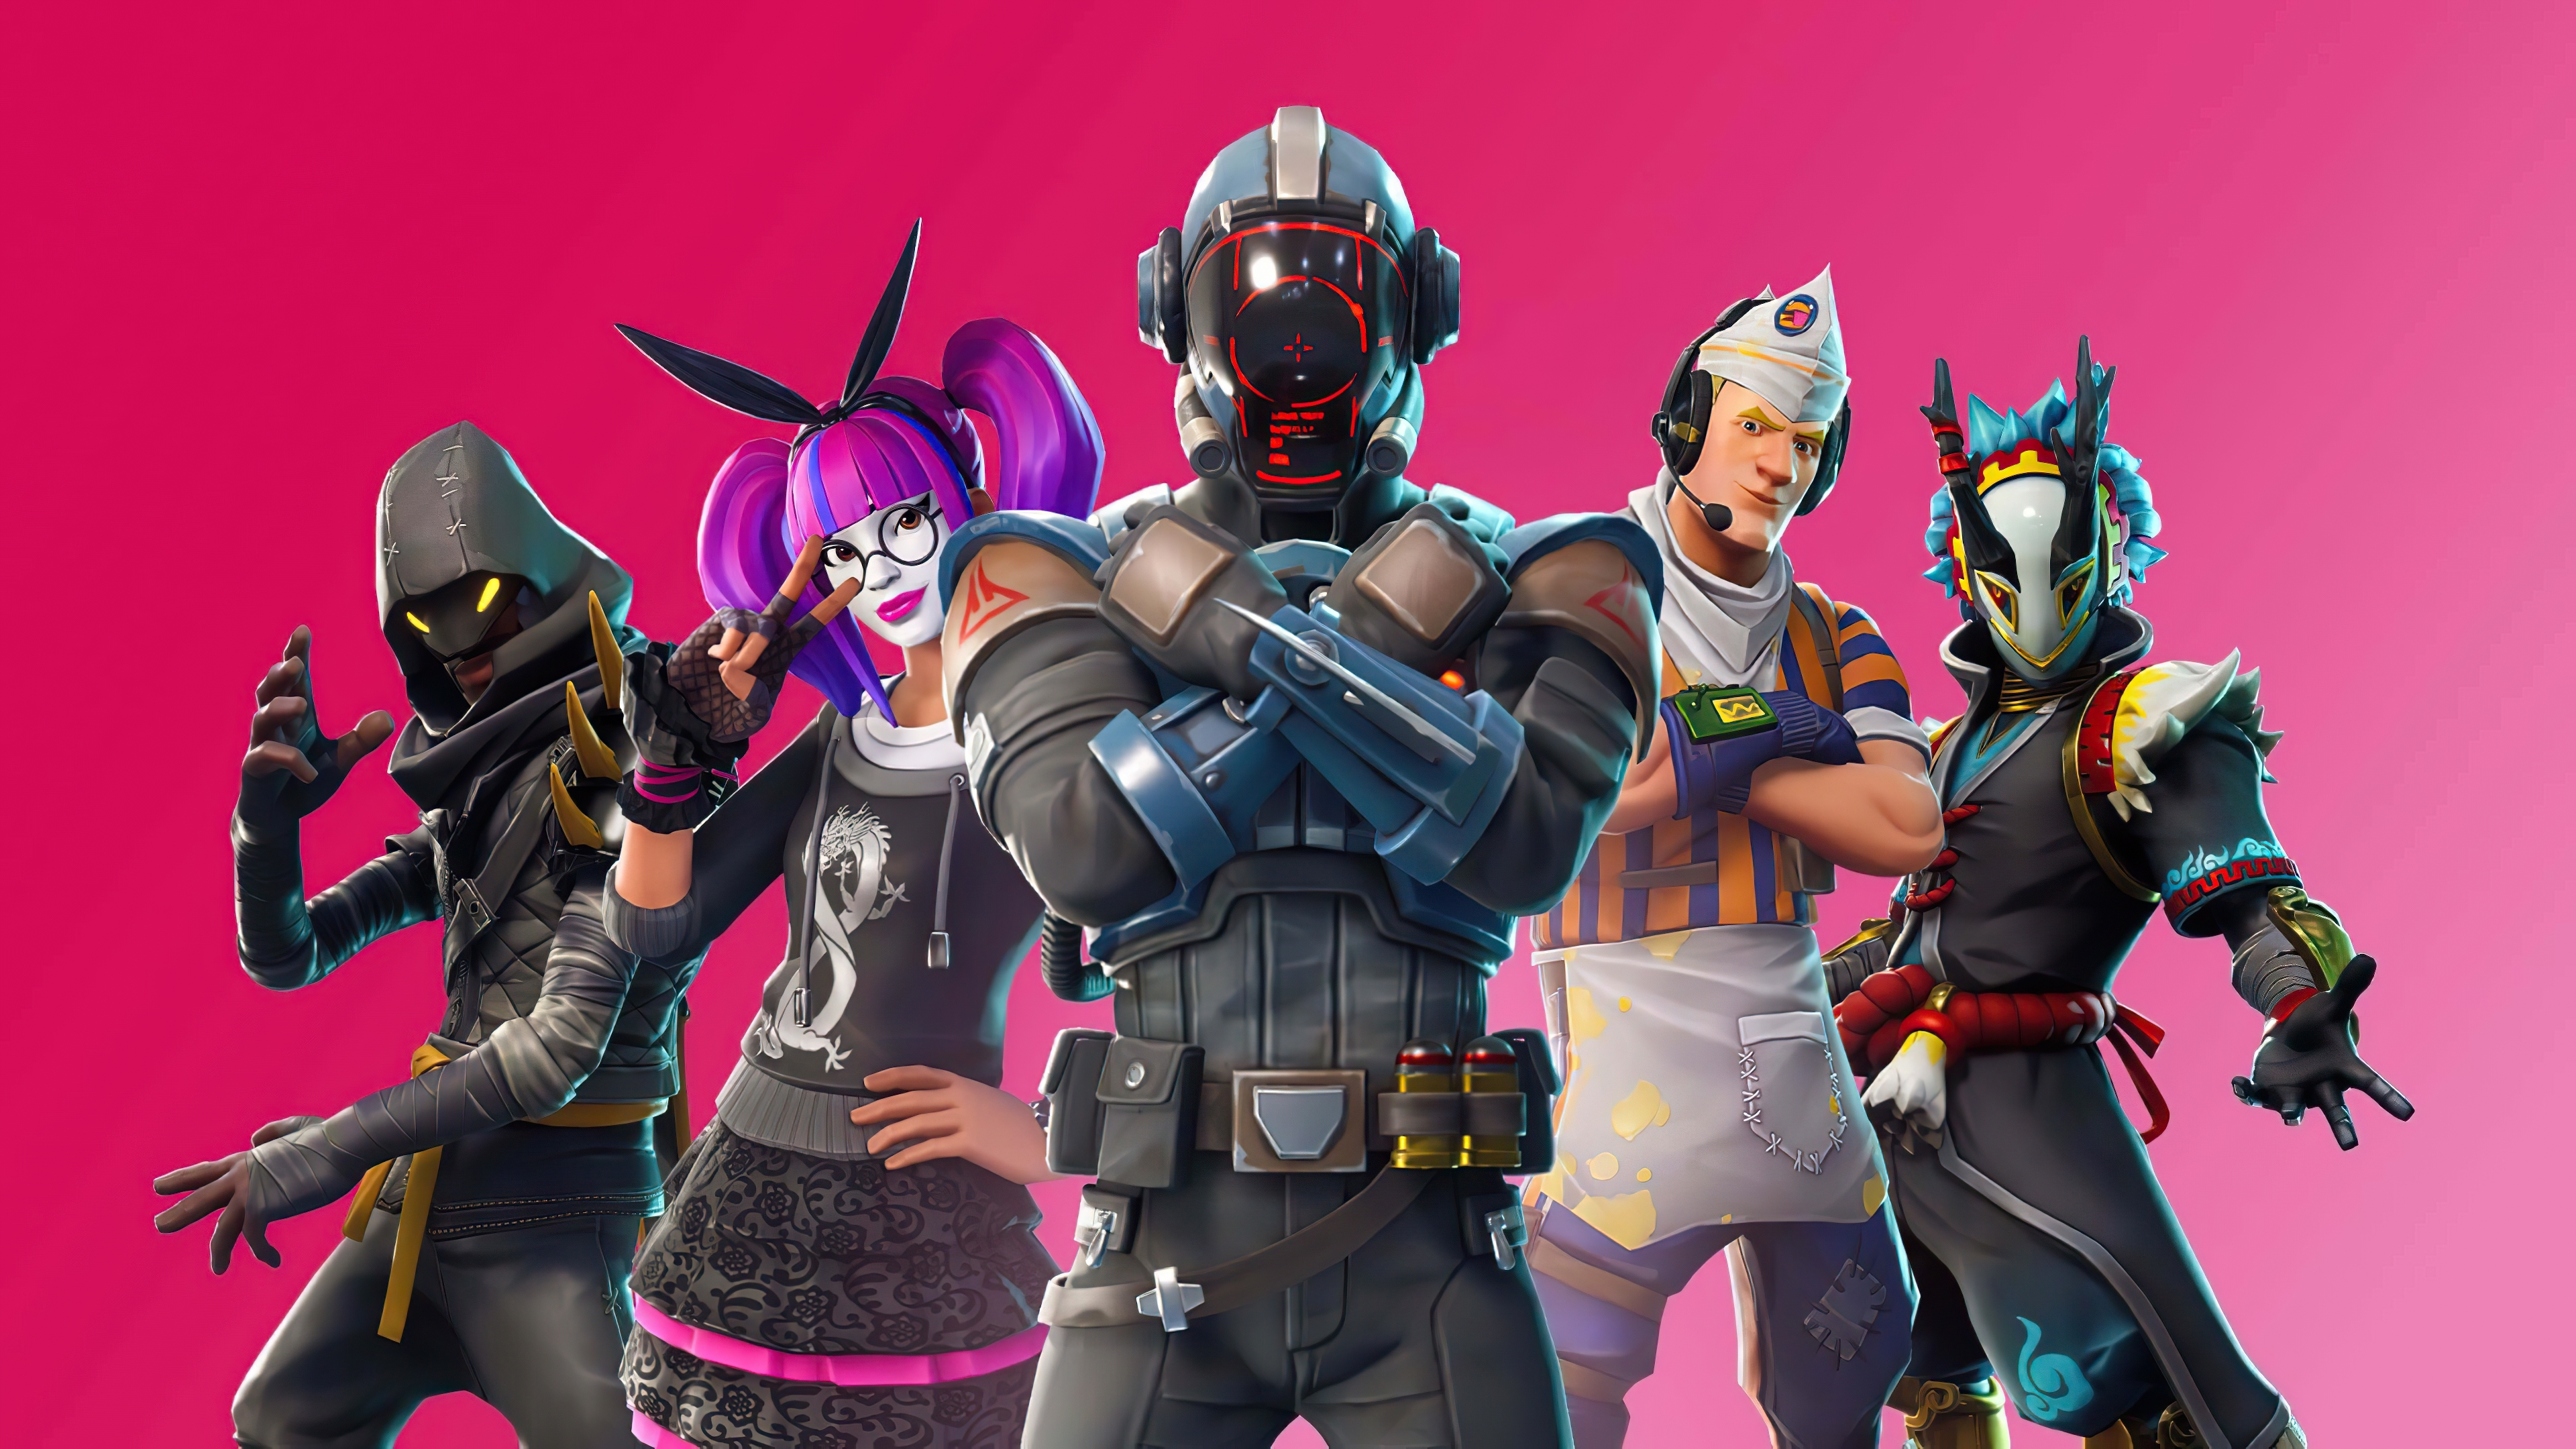 Friendly Players at the Heart of Fortnite's Success